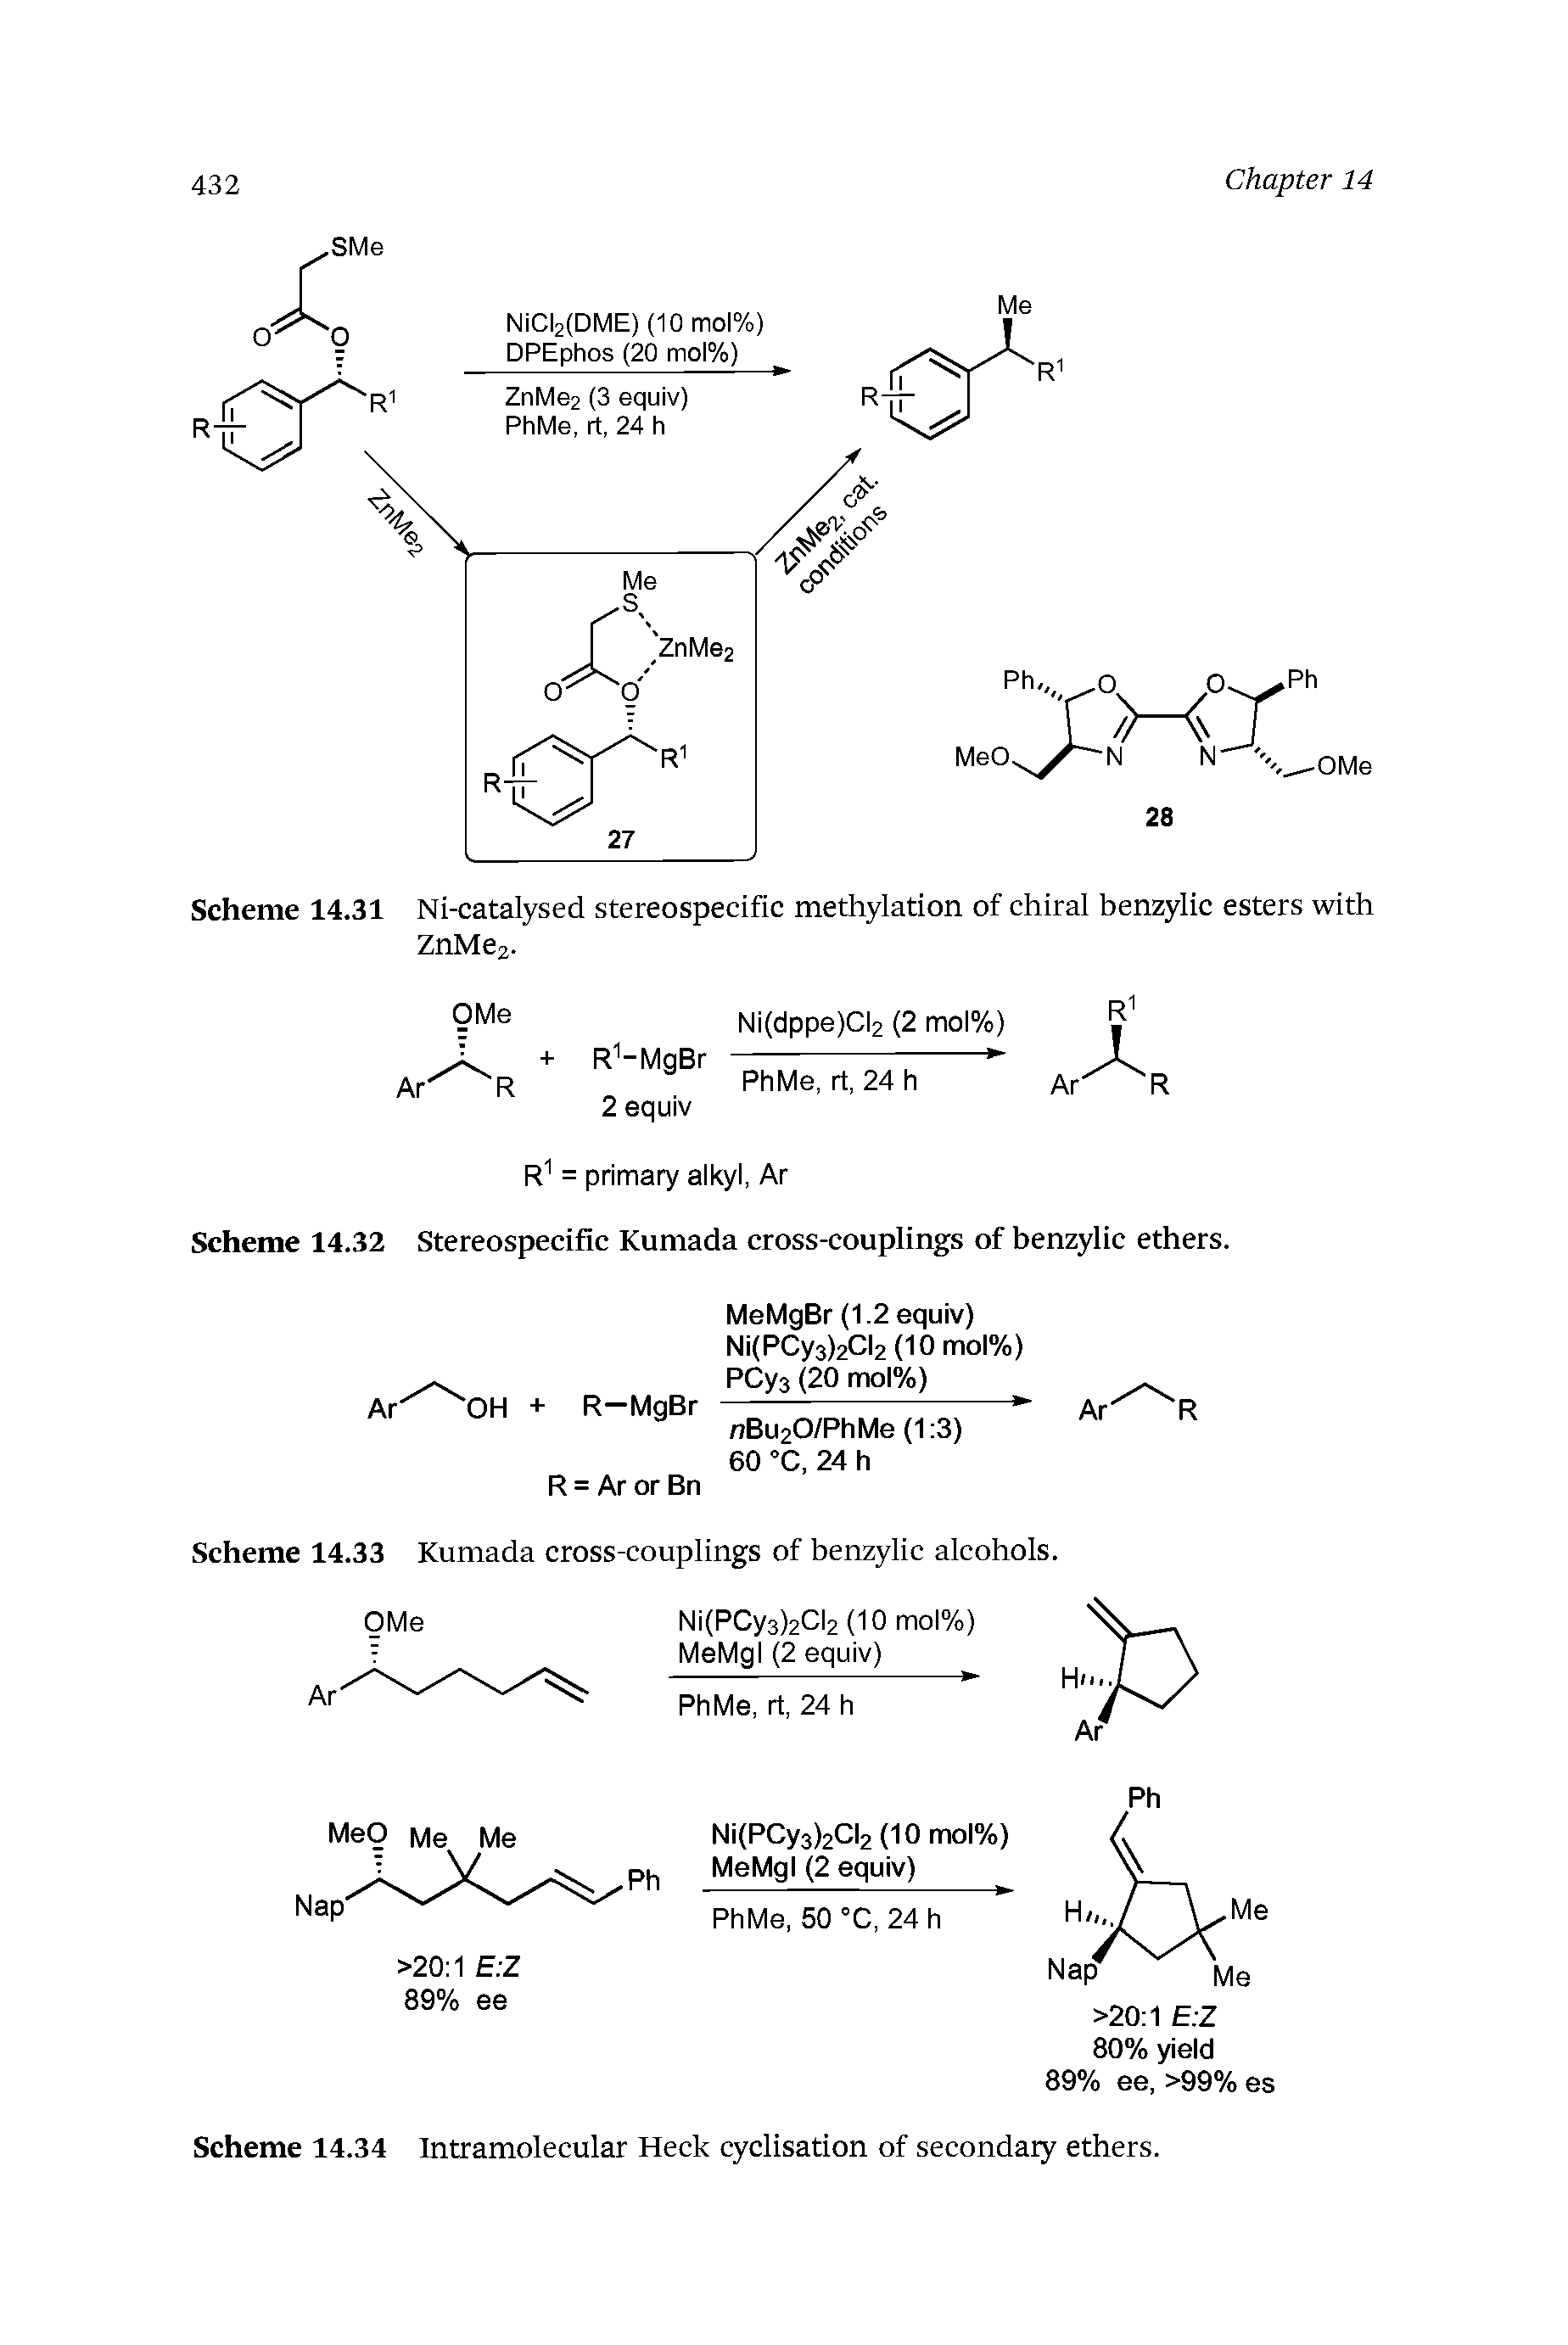 Scheme 14.34 Intramolecular Heck cyclisation of secondary ethers.